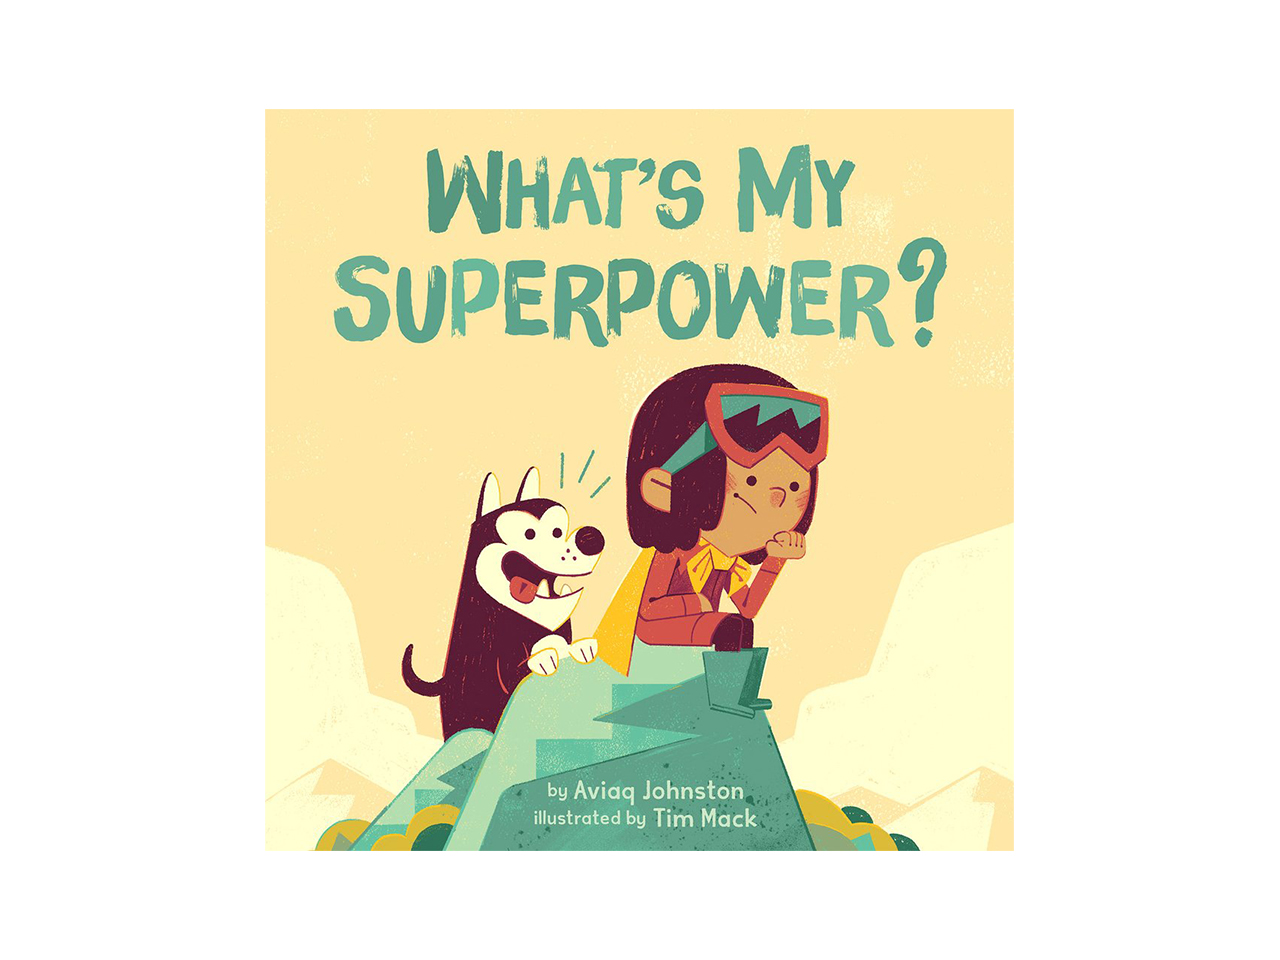 Cover art for What's my Superpower showing a kid in snow gear sitting on a rock with a husky next to him